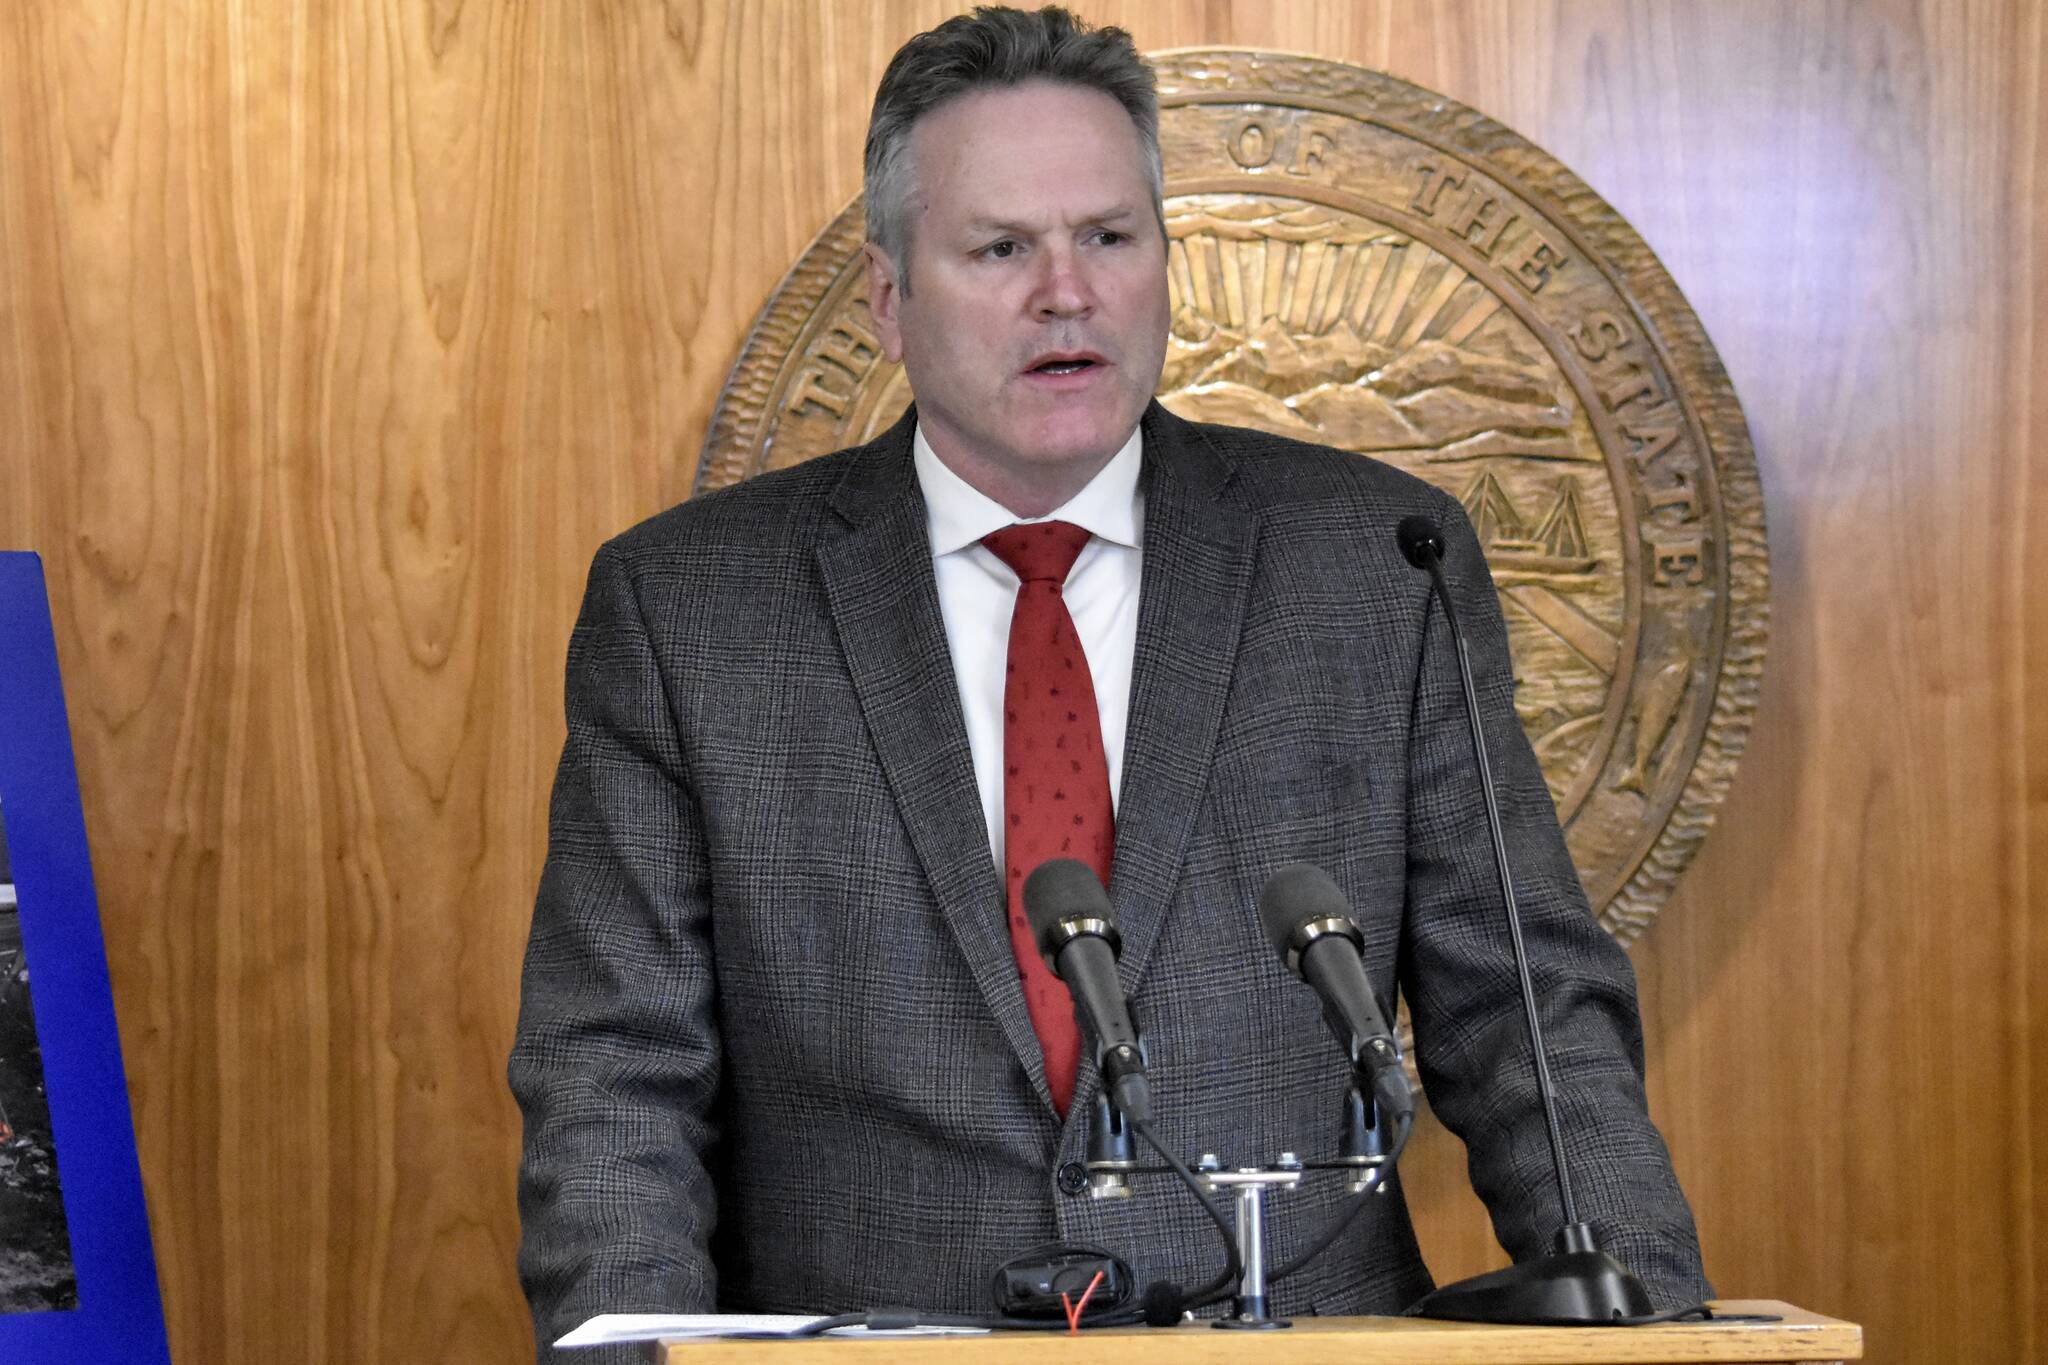 Gov. Mike Dunleavy - seen here speaking with reporters in the Cabinet Room at the Alaska State Capitol on March 8, 2022 - spoke to the Empire recently about his approach to government after having served as Alaska's chief executive. (Peter Segall / Juneau Empire file)